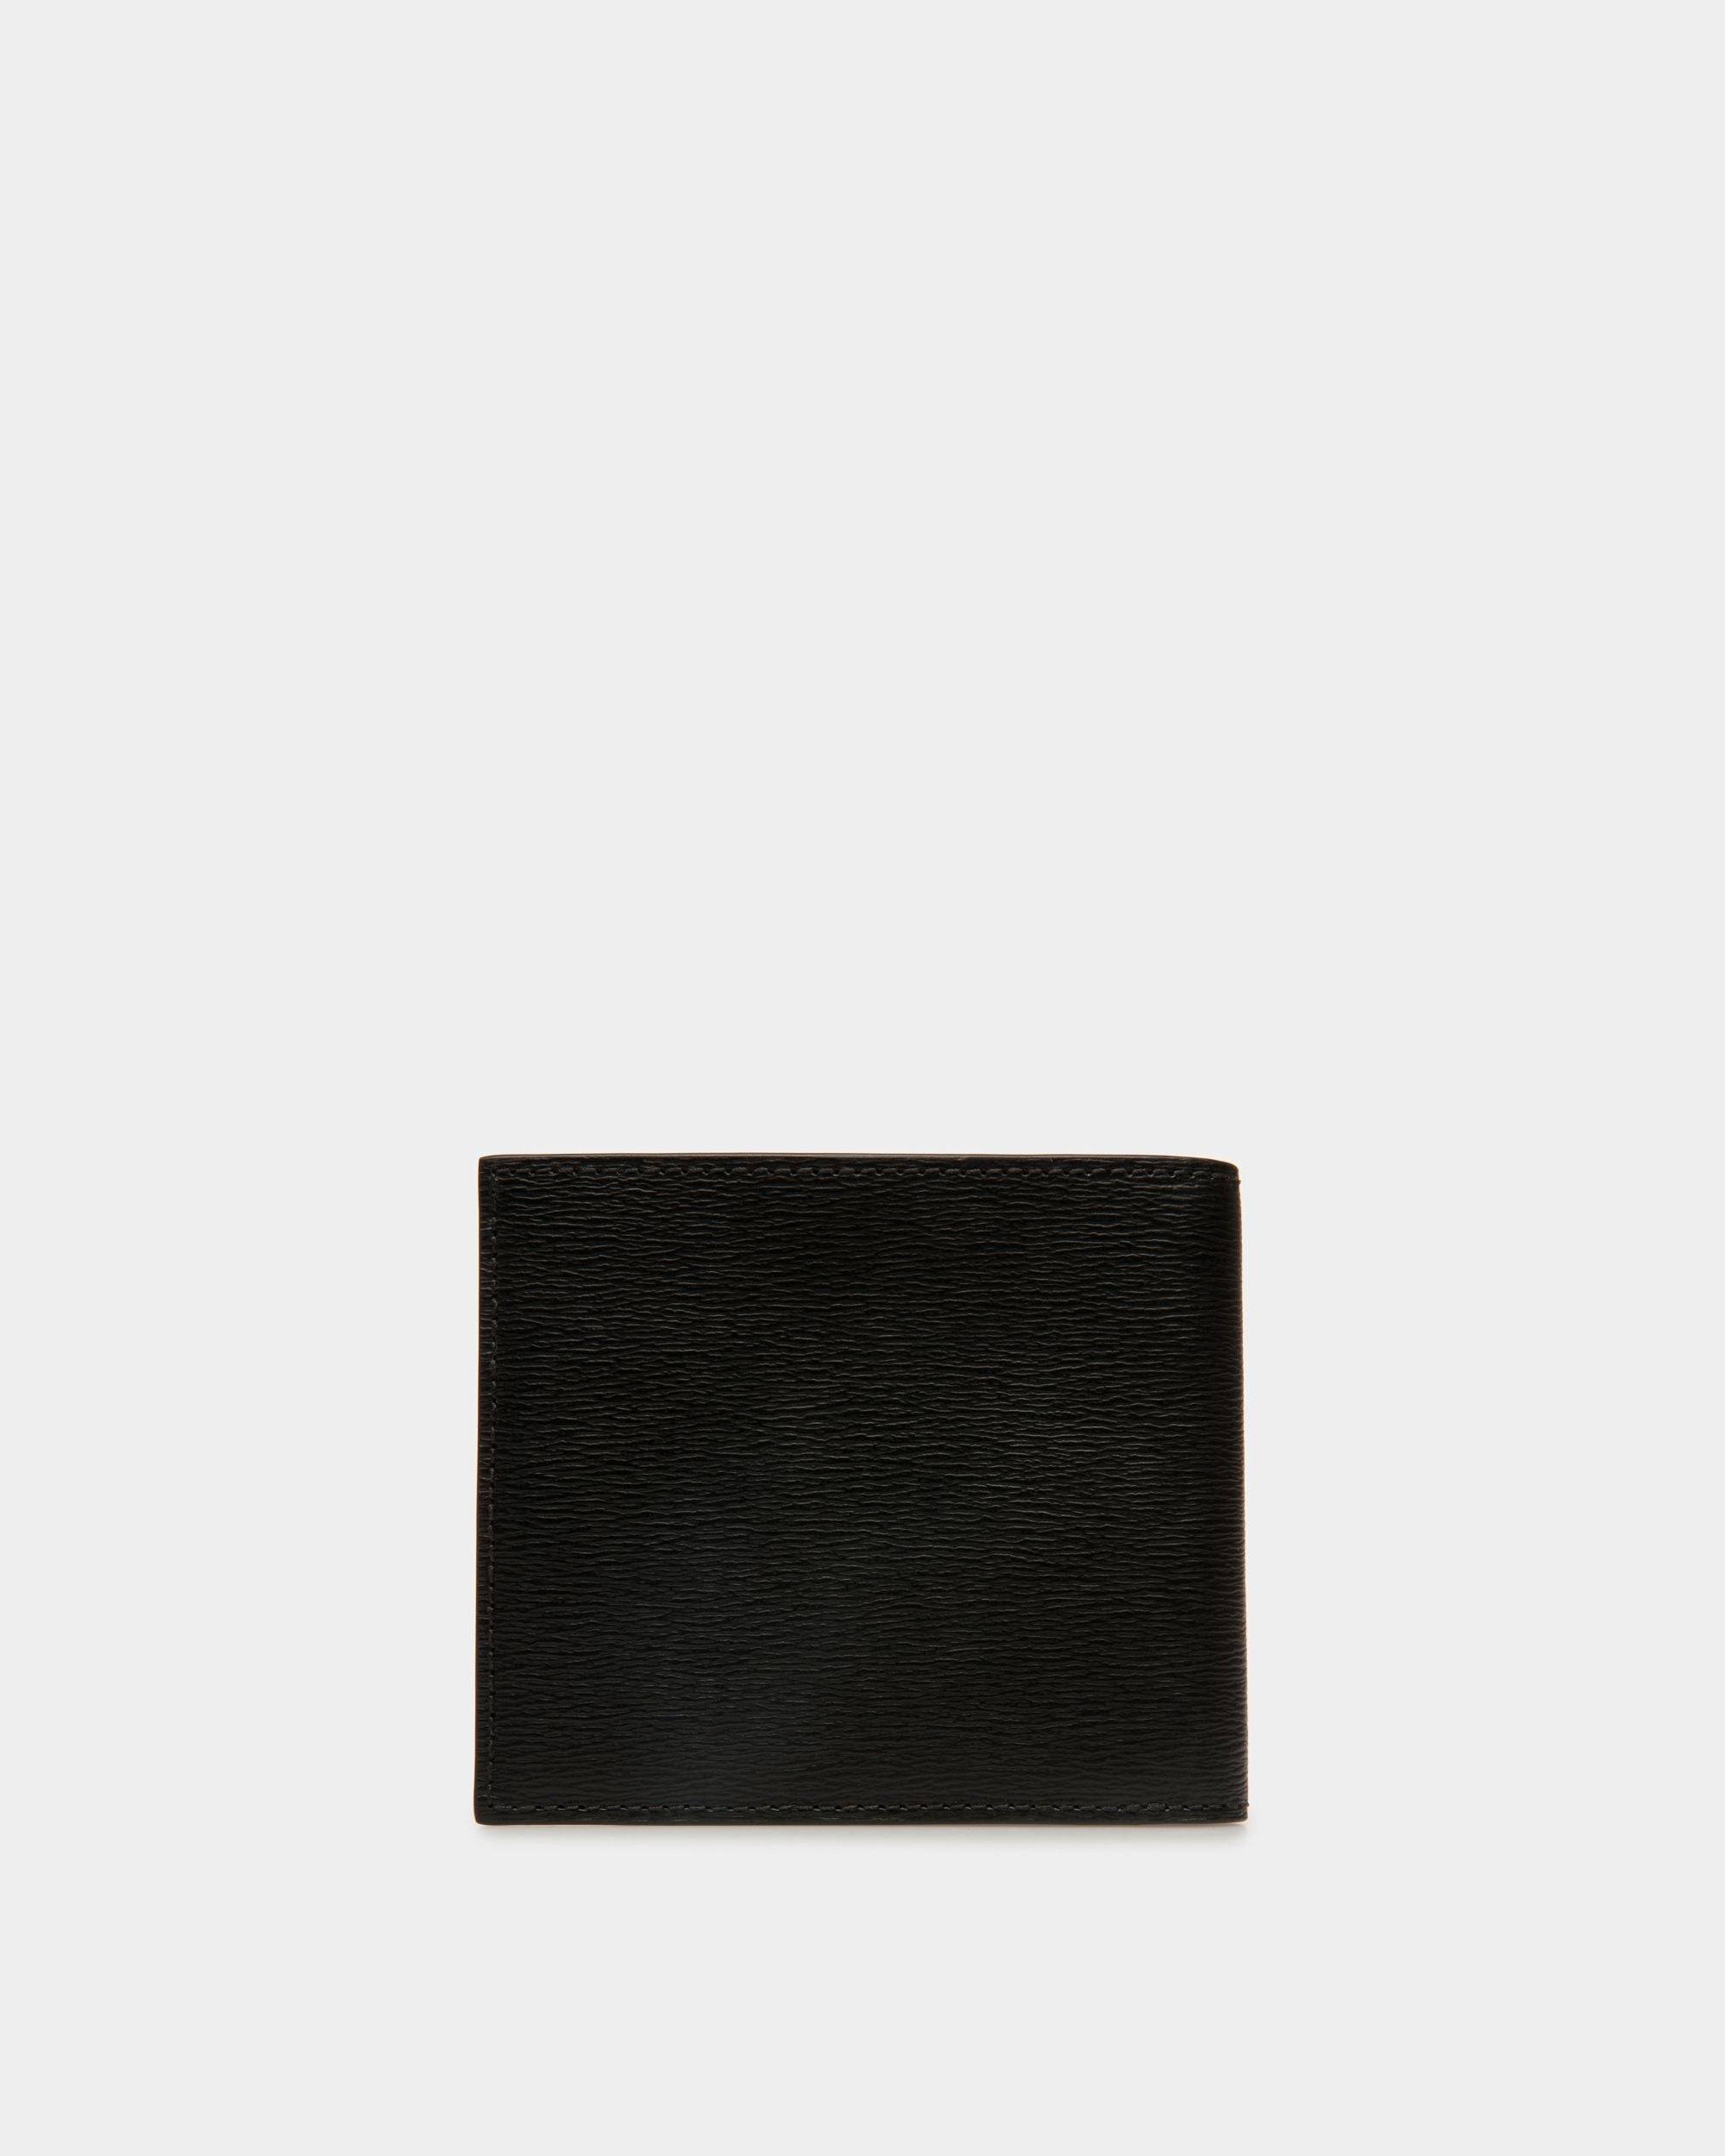 Cny | Men's Bifold Wallet in Black And Red Grained Leather | Bally | Still Life Back